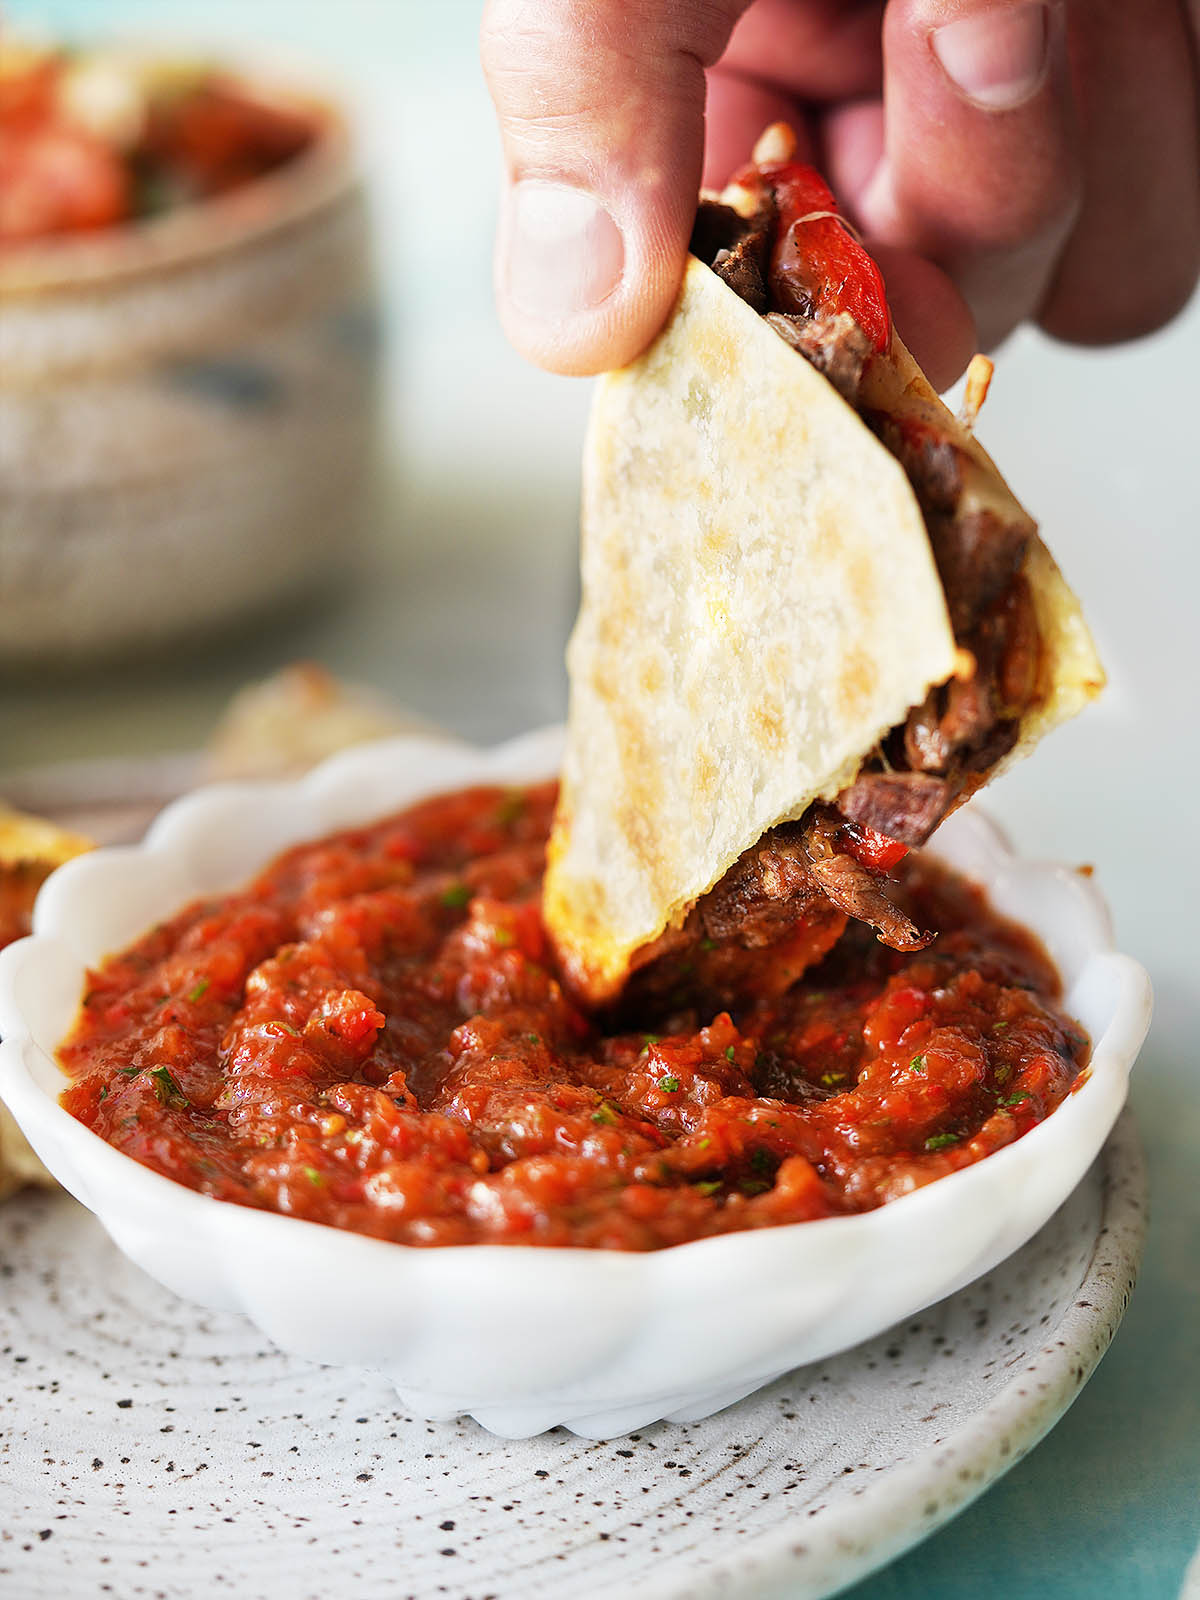 A hand dipping a slice of quesadilla into roasted salsa.